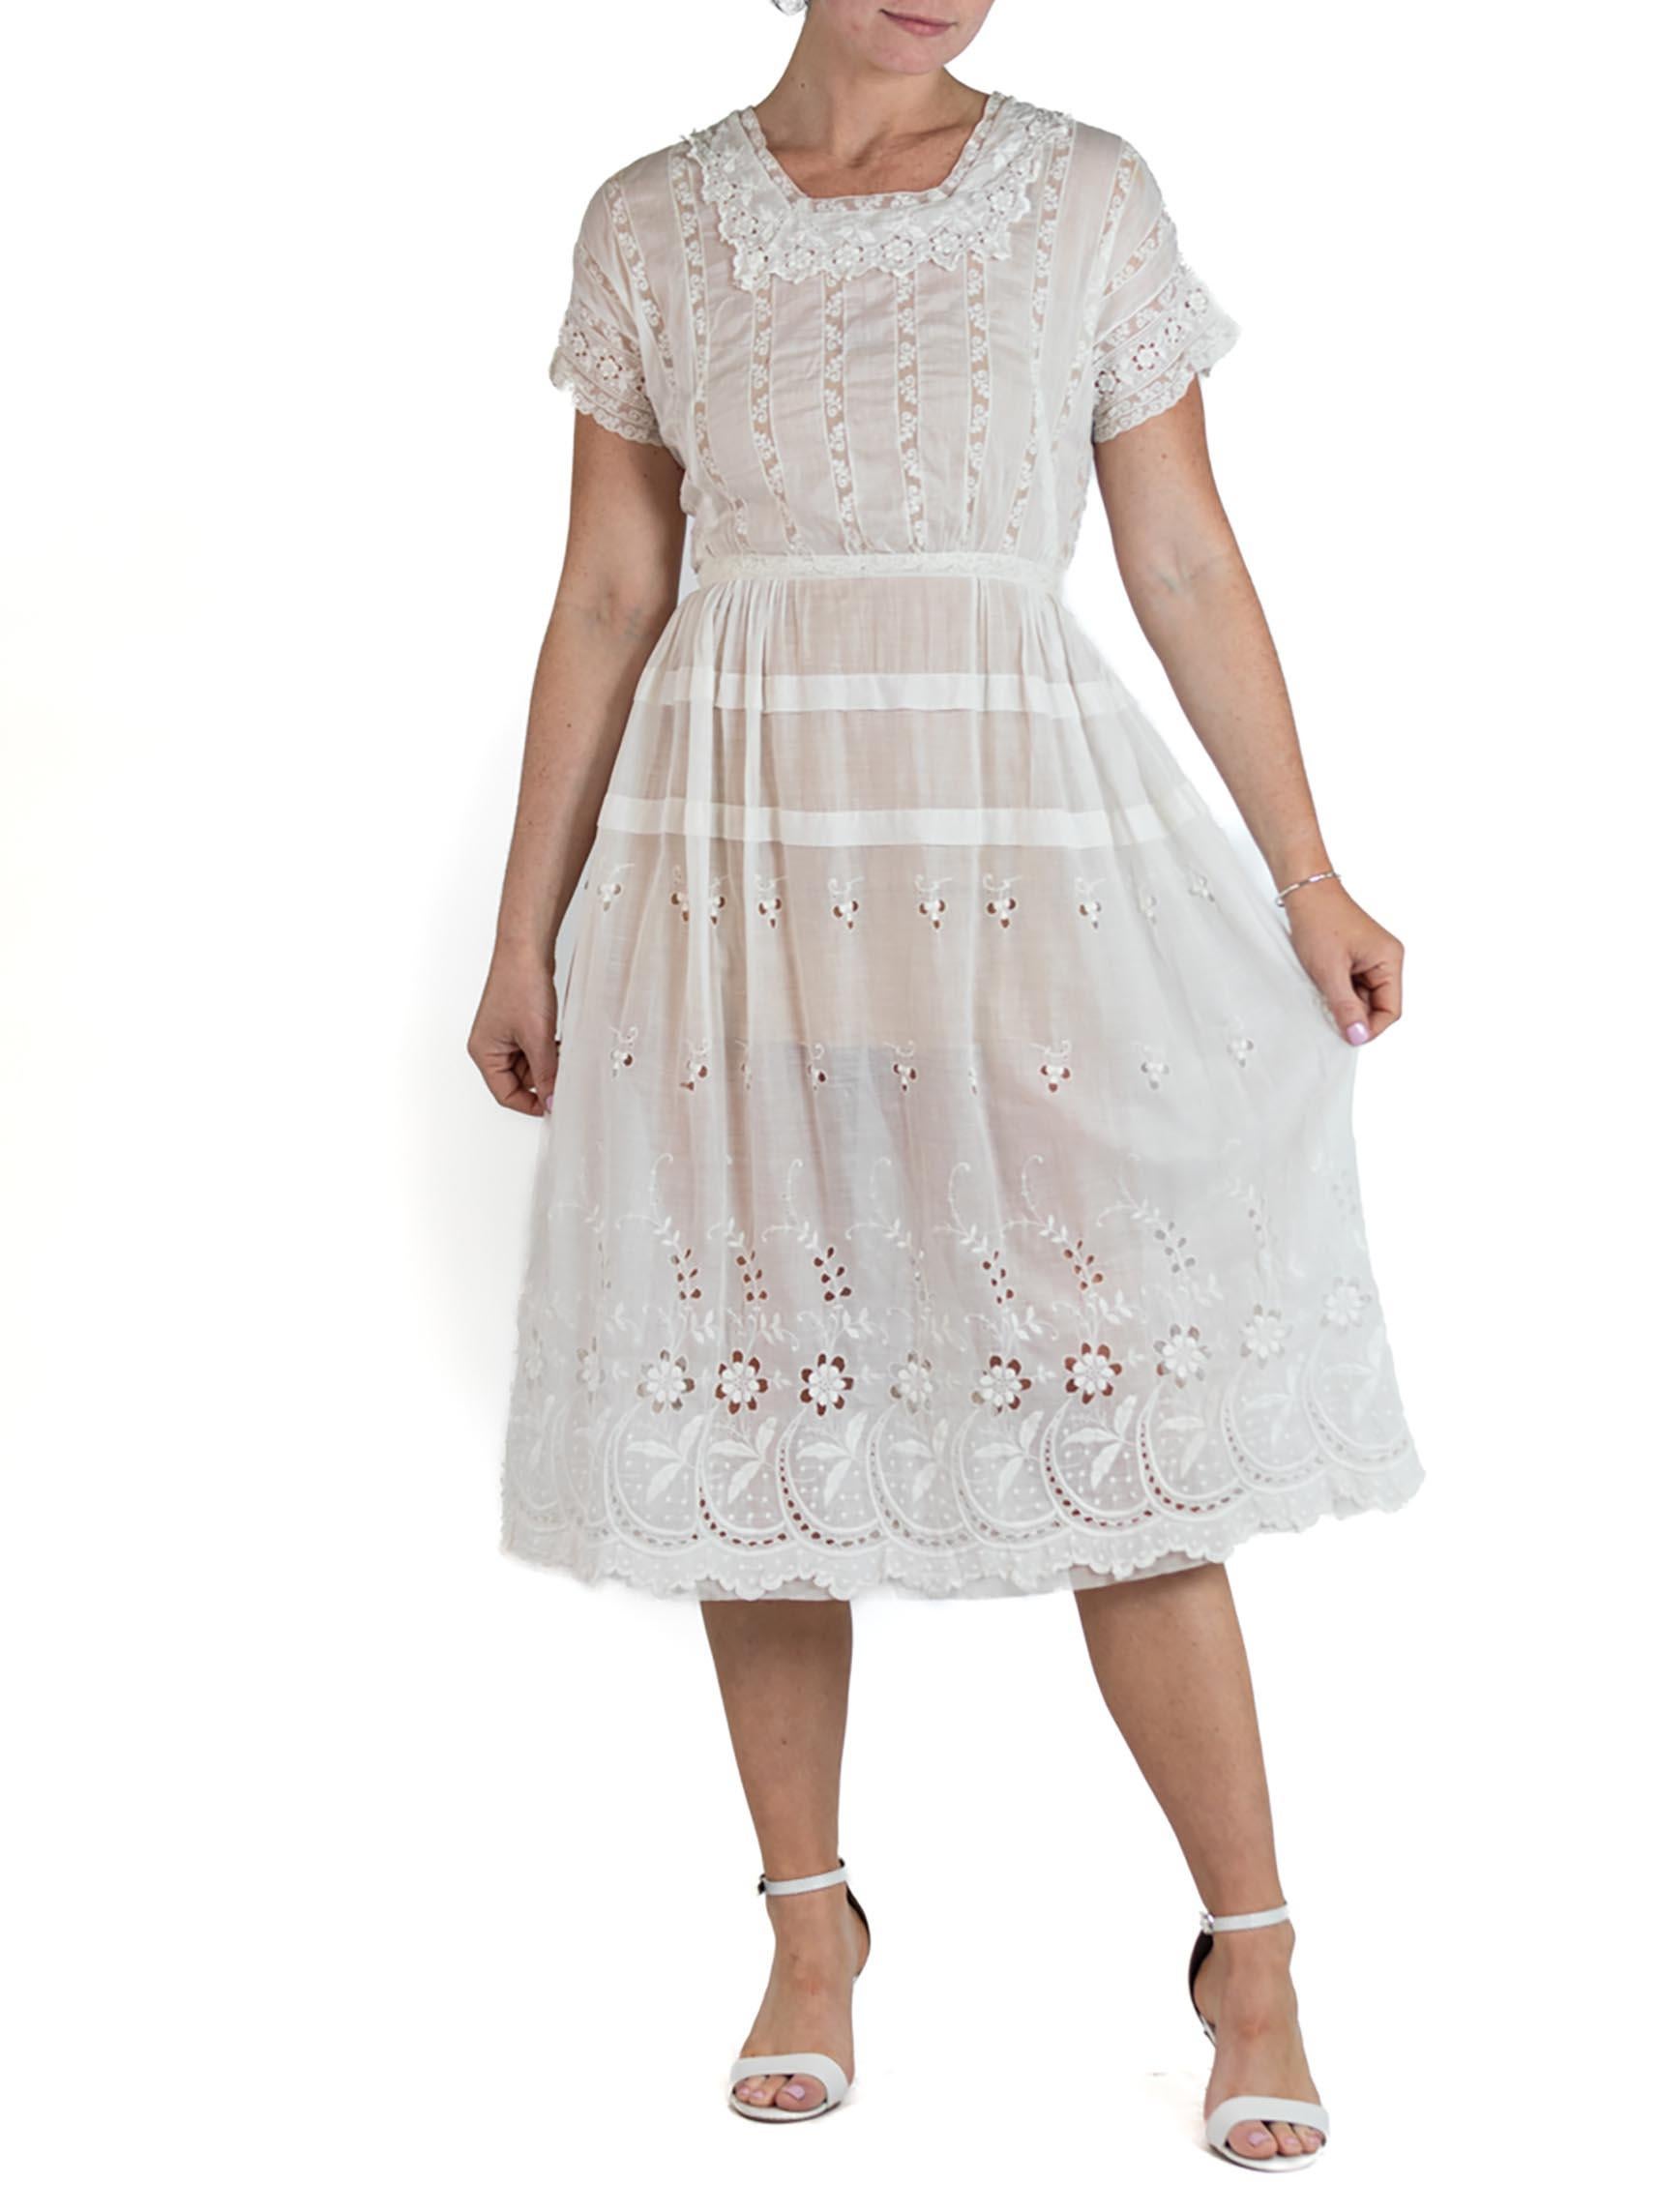 Edwardian White Organic Cotton Lawn Embroidered Lace Summer Tea Dress In Excellent Condition For Sale In New York, NY